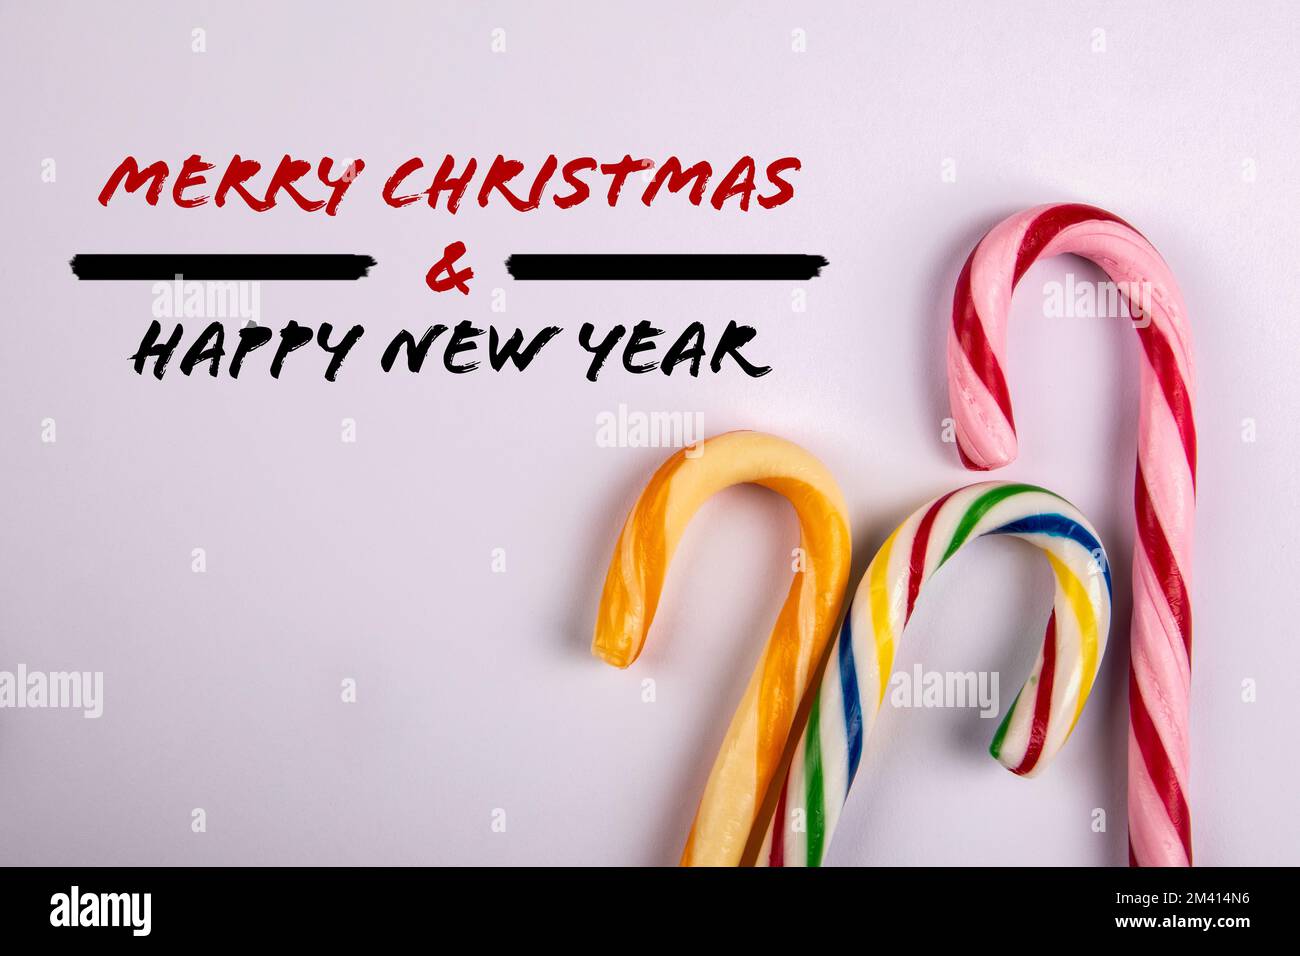 Merry Christmas and a happy New Year. Sweets on a white background. Stock Photo